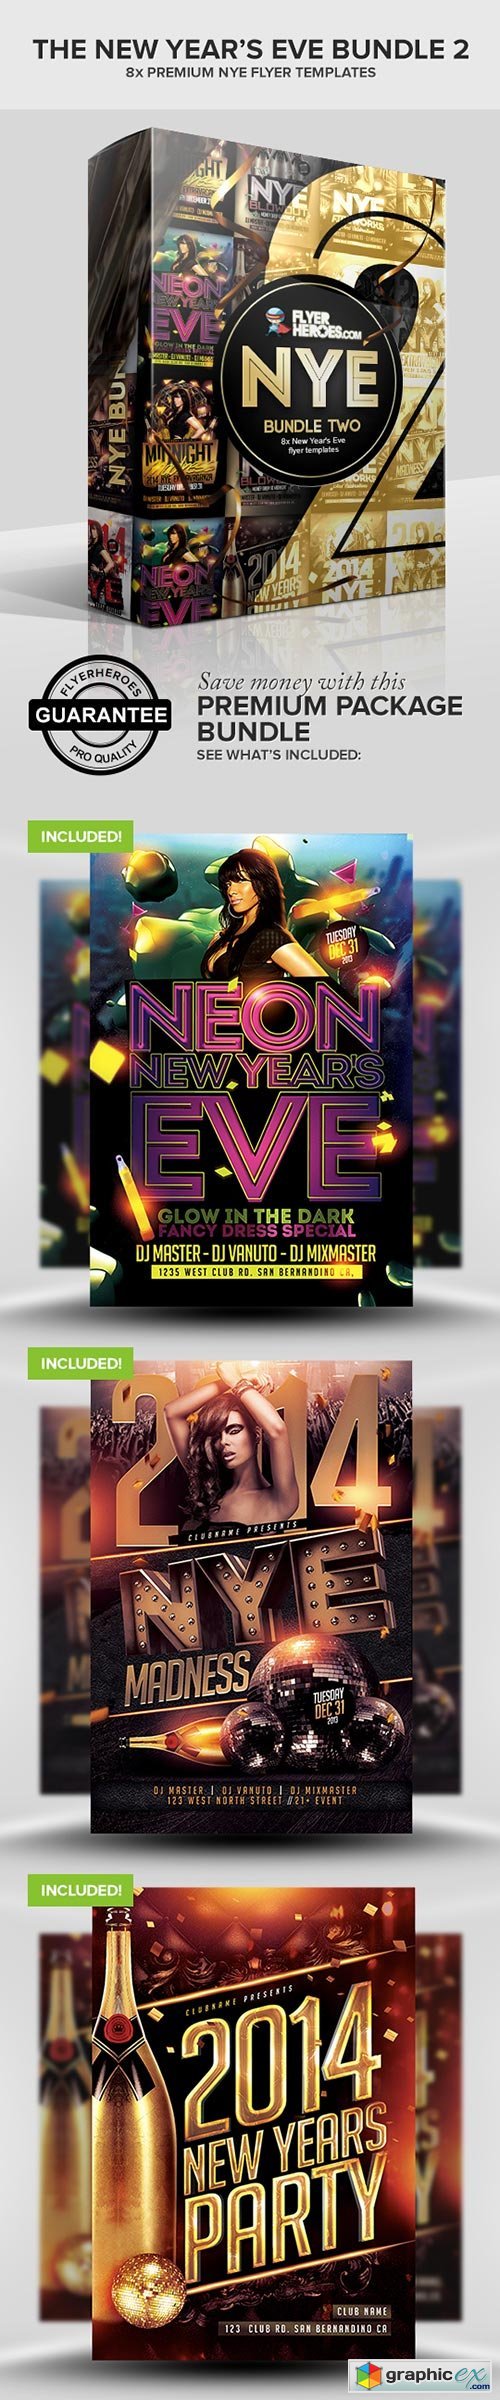 The New Years Eve Bundle 2